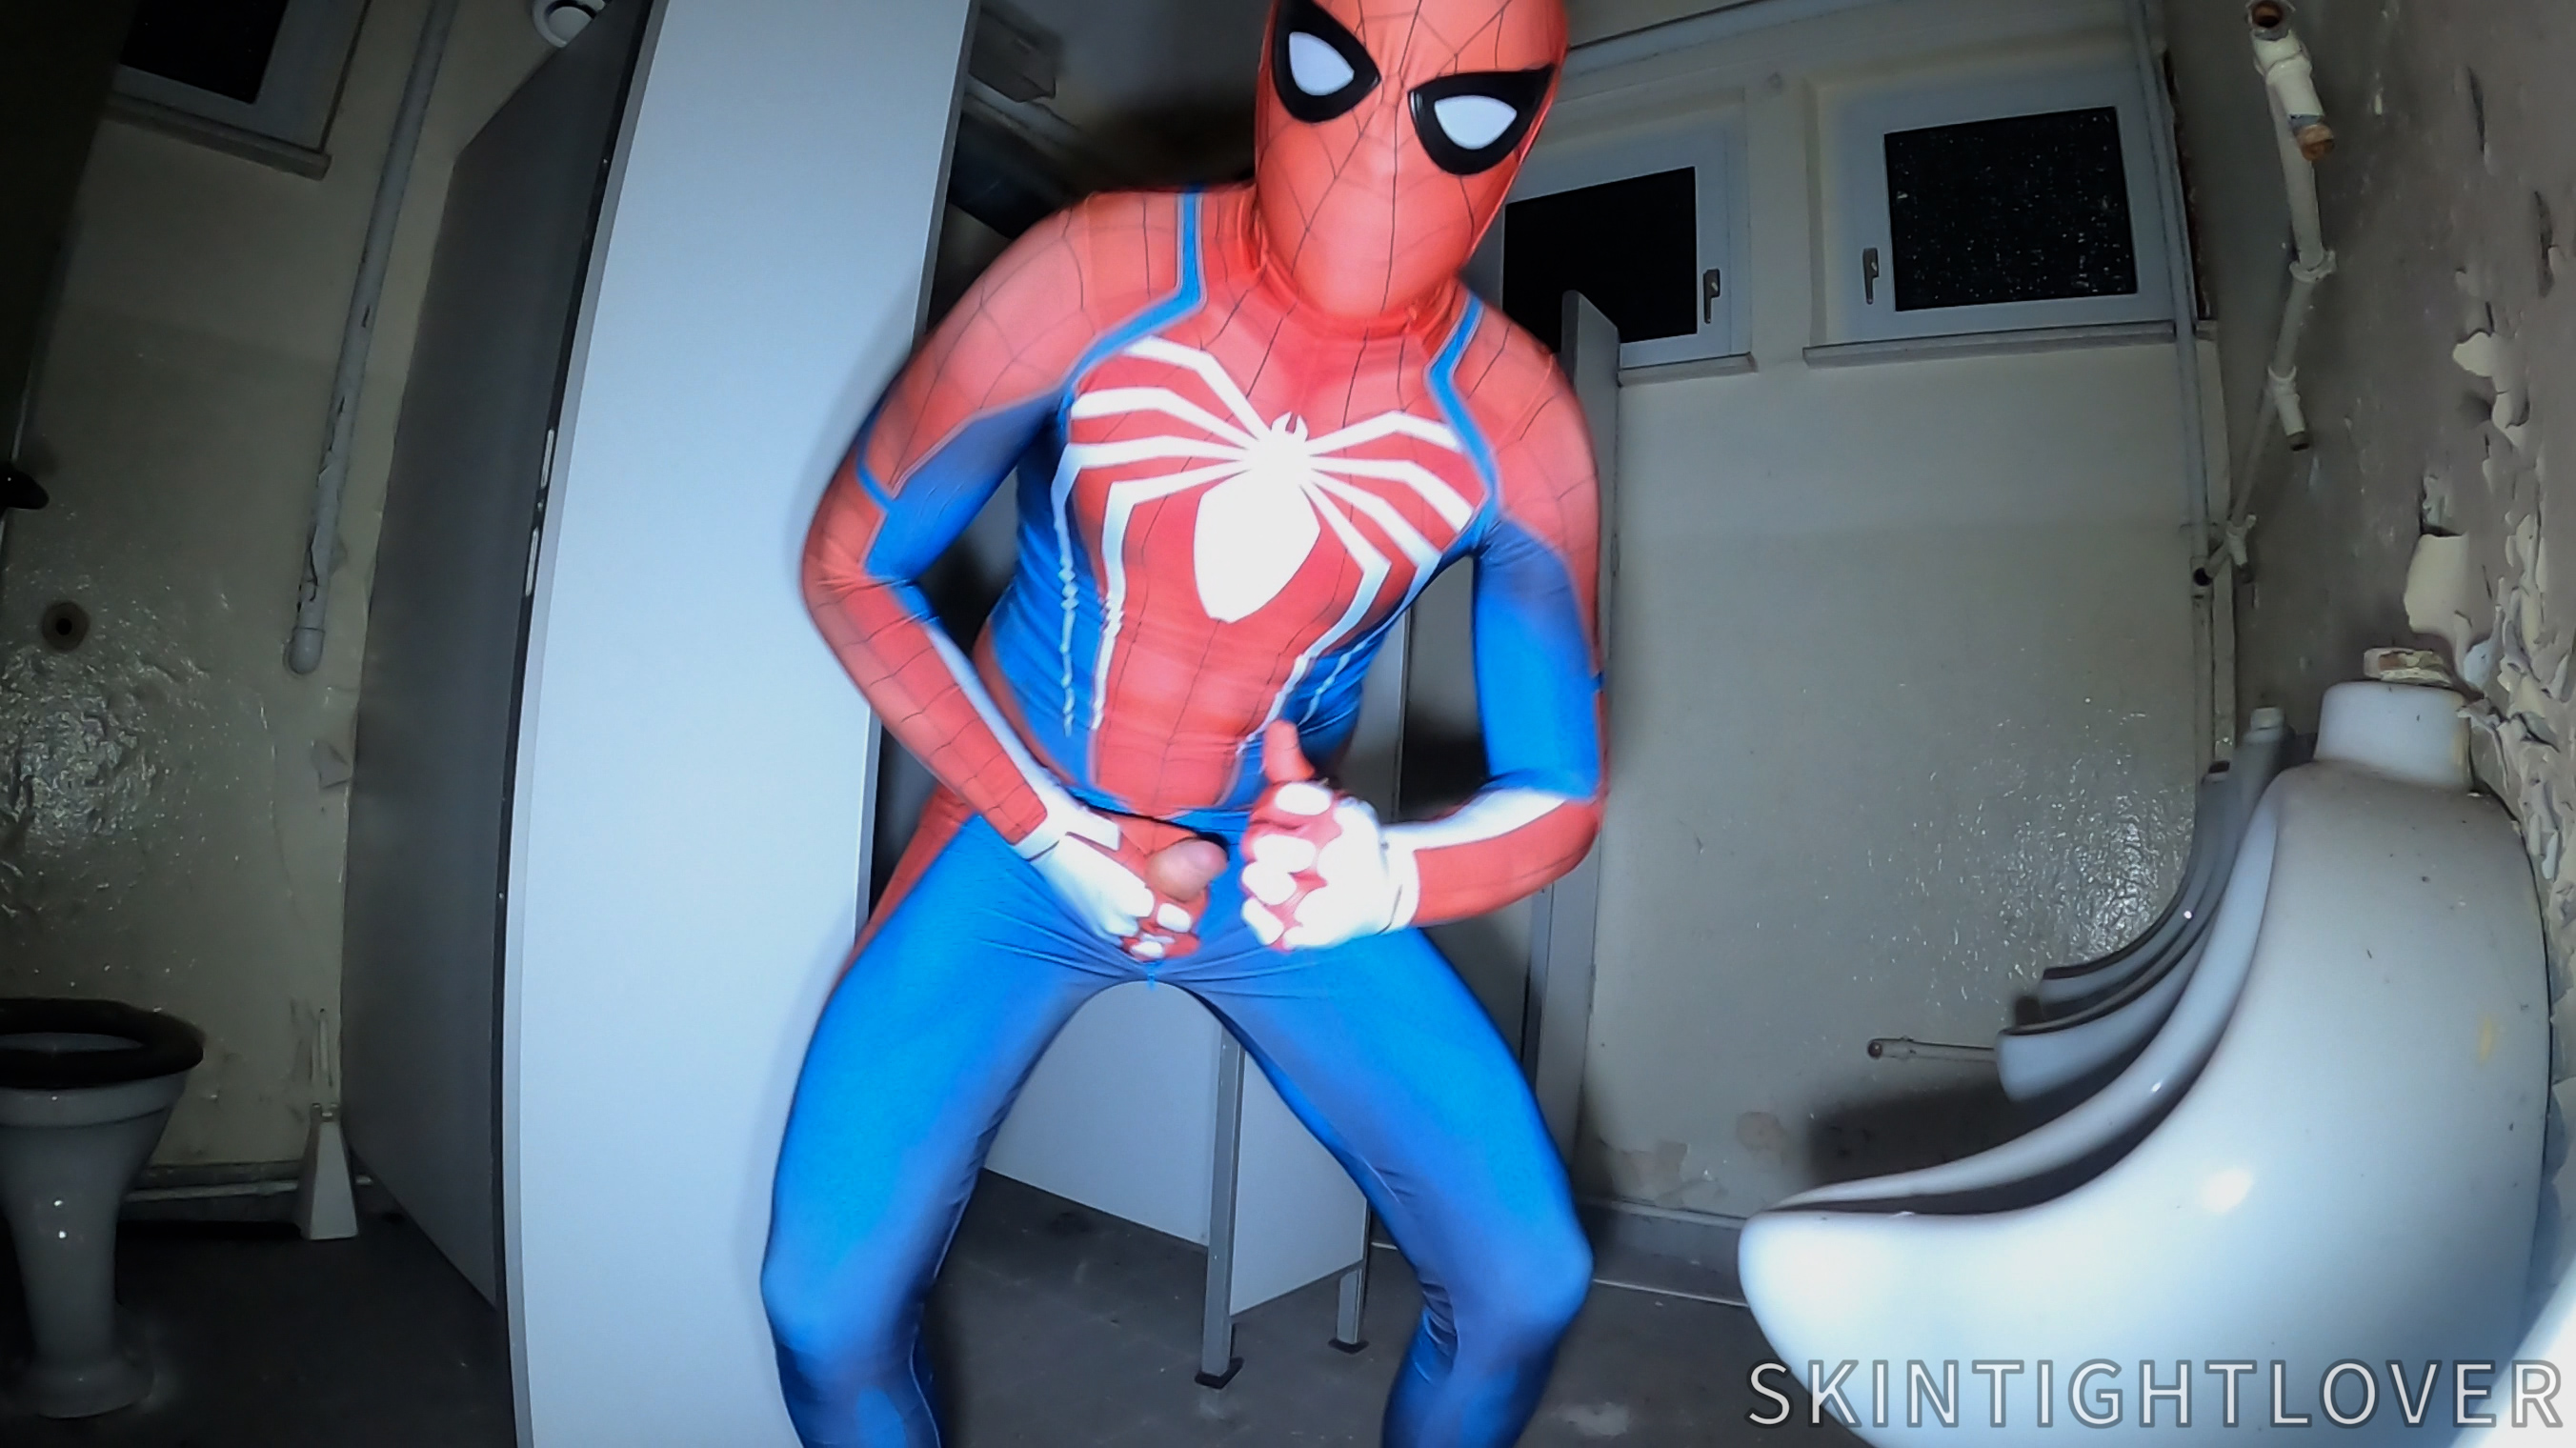 Spiderman shoots web in old building